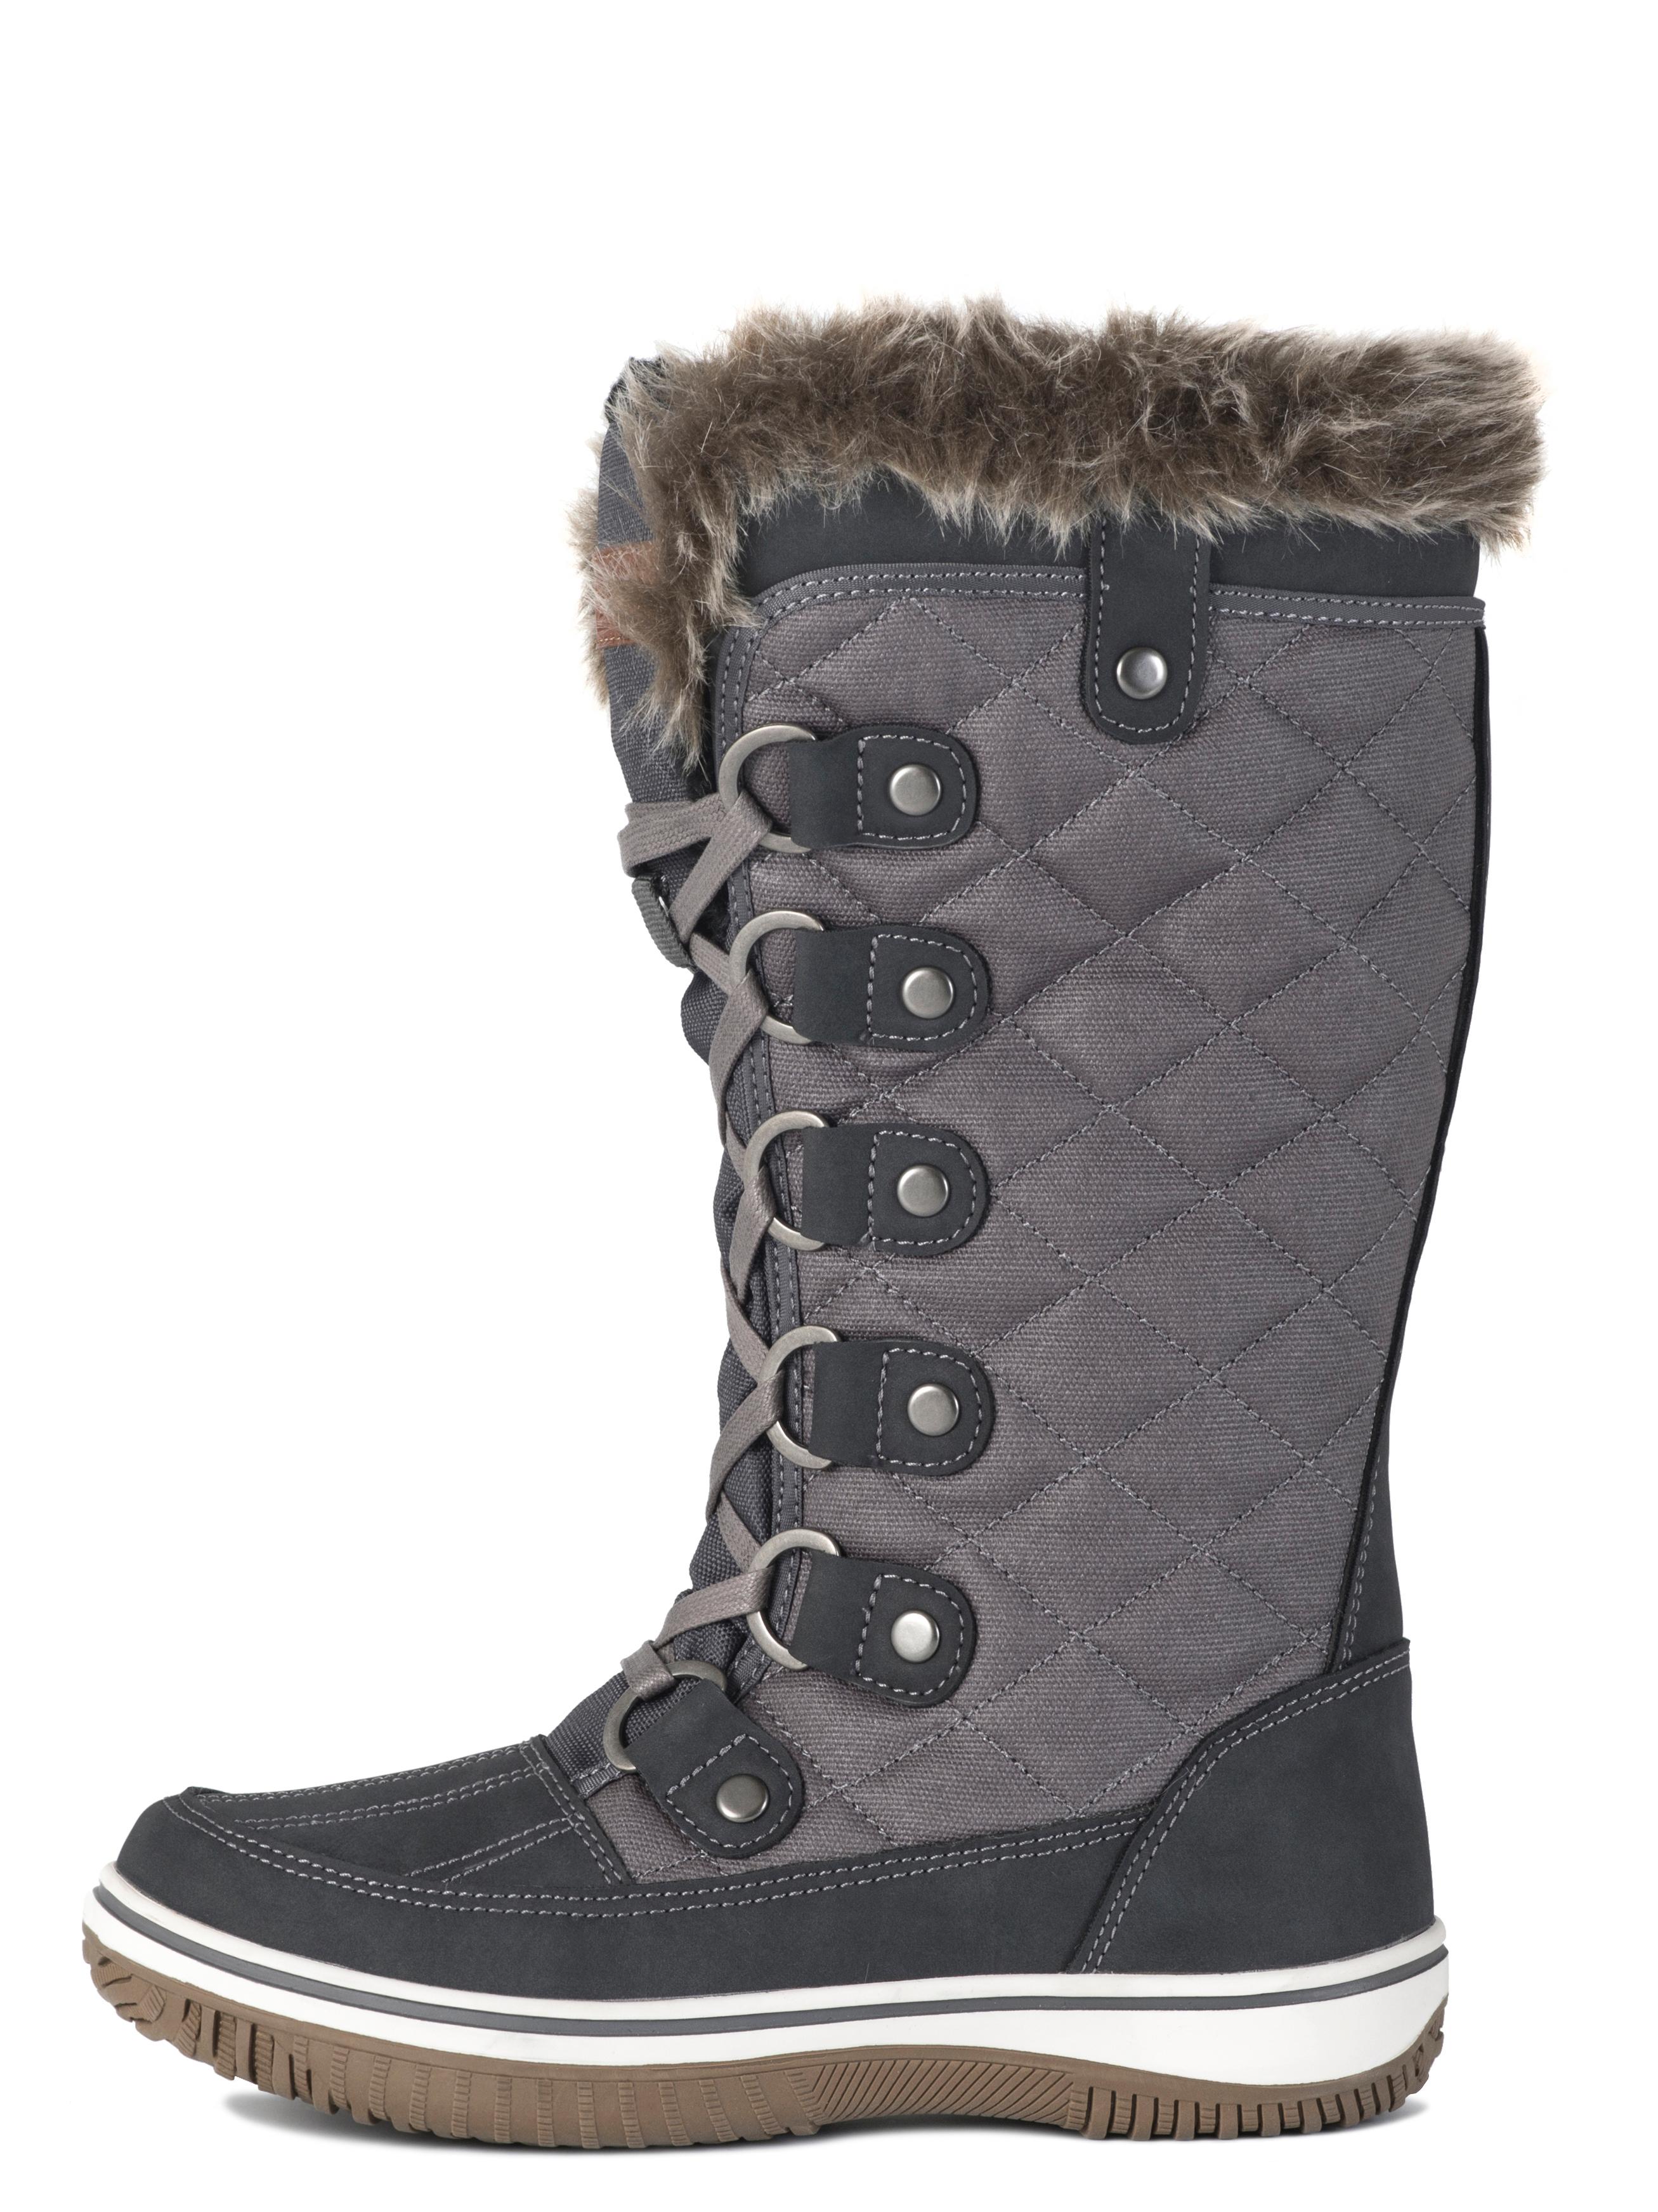 BUY IN STORE ONLY - OUR LIST for WOMENS - Winter Boots shoes